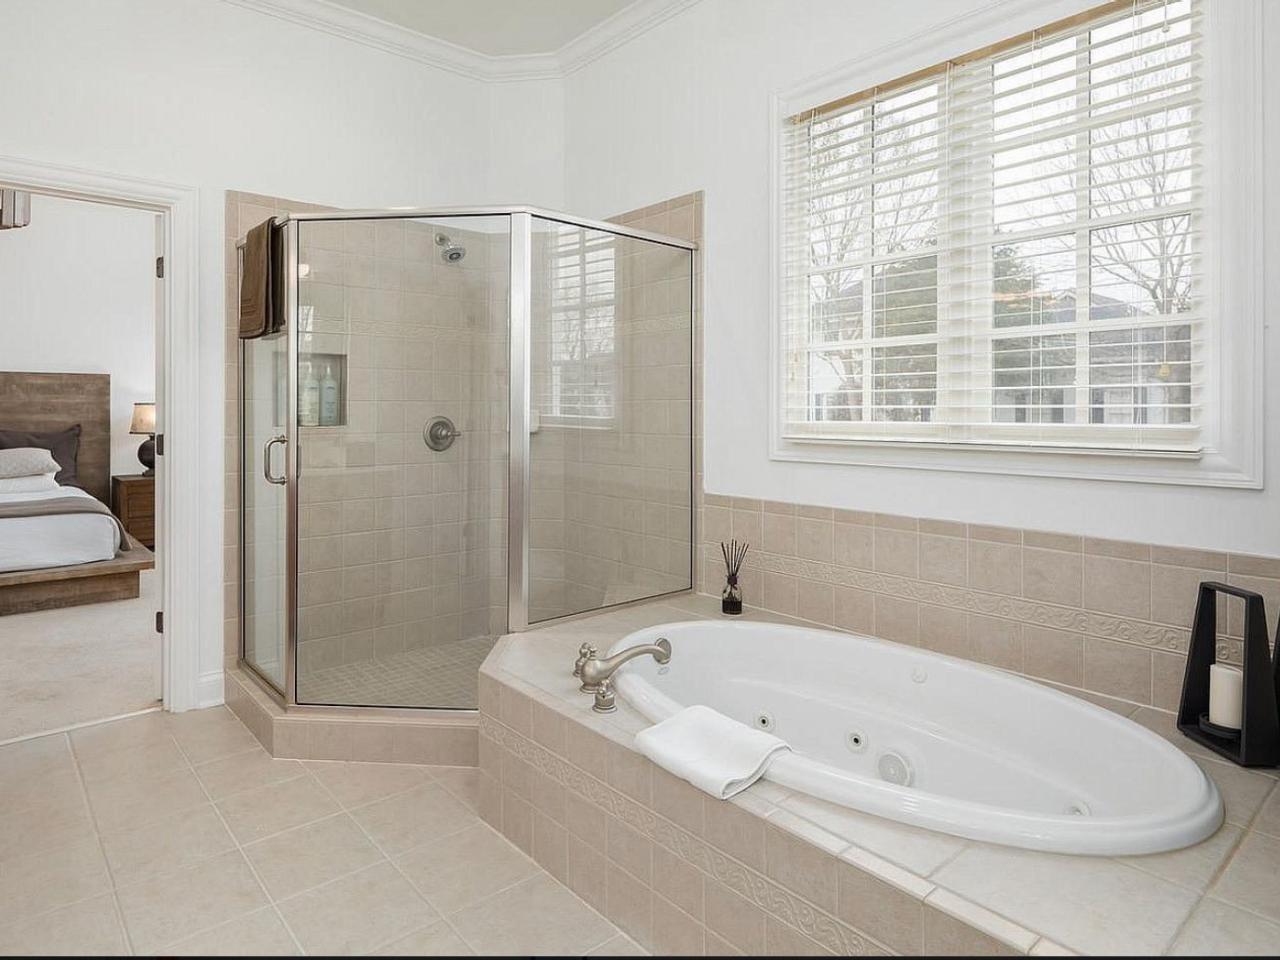 30 Small Bathroom Remodels From HGTV Shows